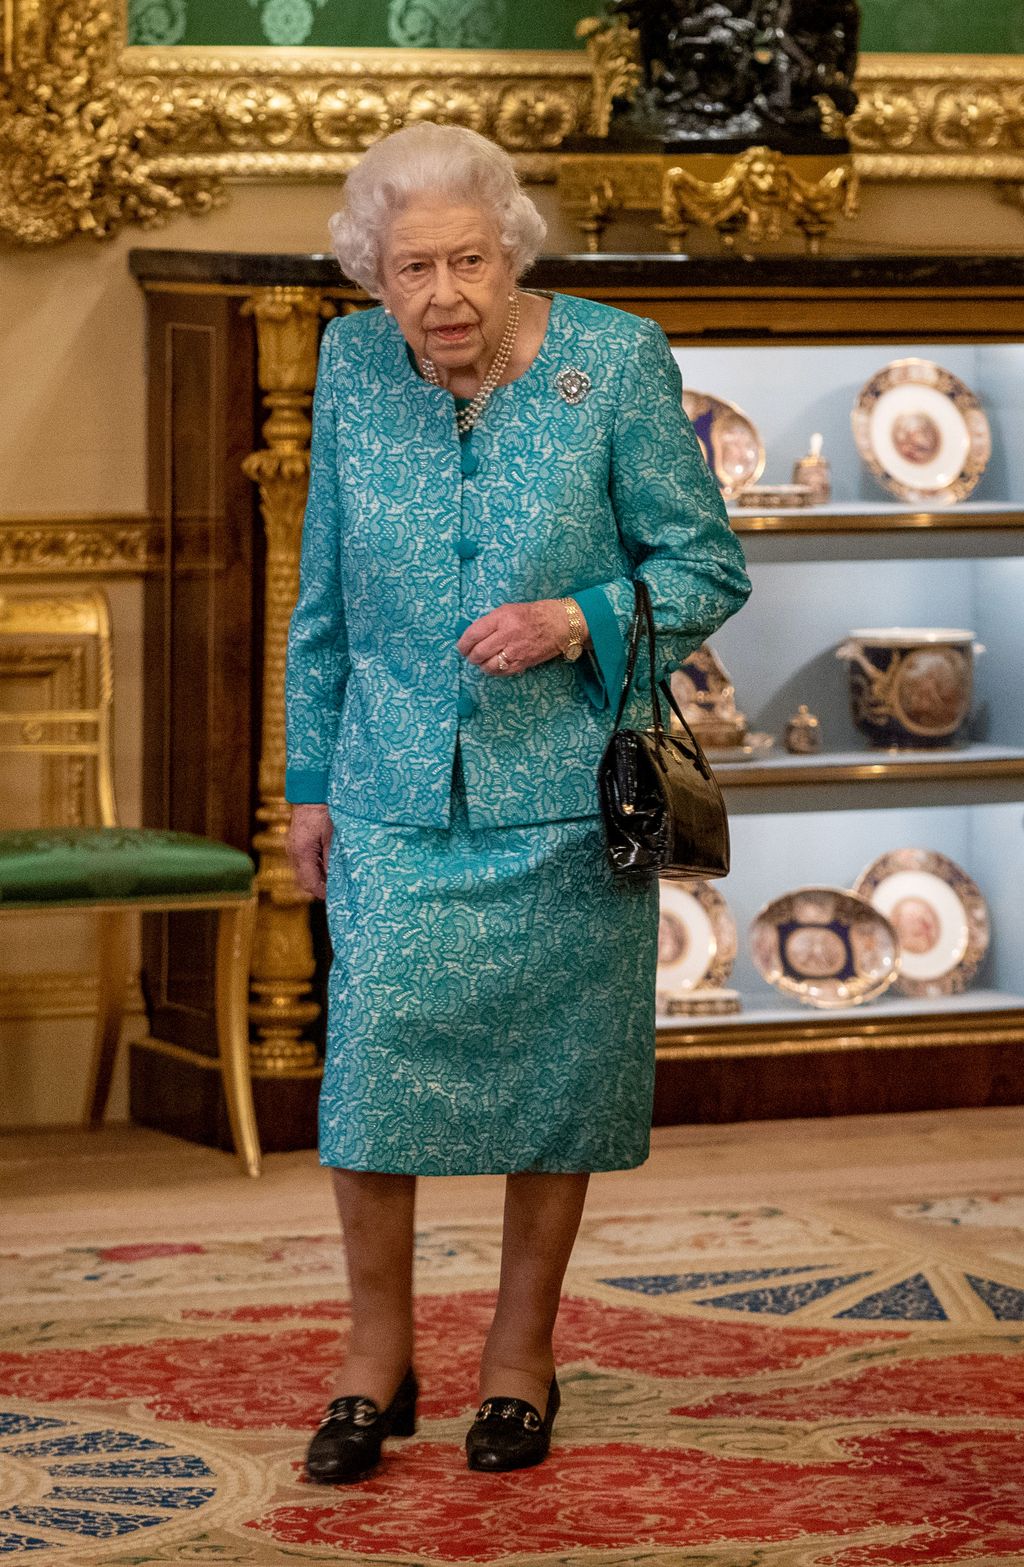 WINDSOR, UNITED KINGDOM - OCTOBER 19:  Queen Elizabeth II arrives to greet guests during a reception for international business and investment leaders at Windsor Castle to mark the Global Investment Summit on October 19, 2021 in Windsor, England.  (Photo by Arthur Edwards-Pool/Getty Images)